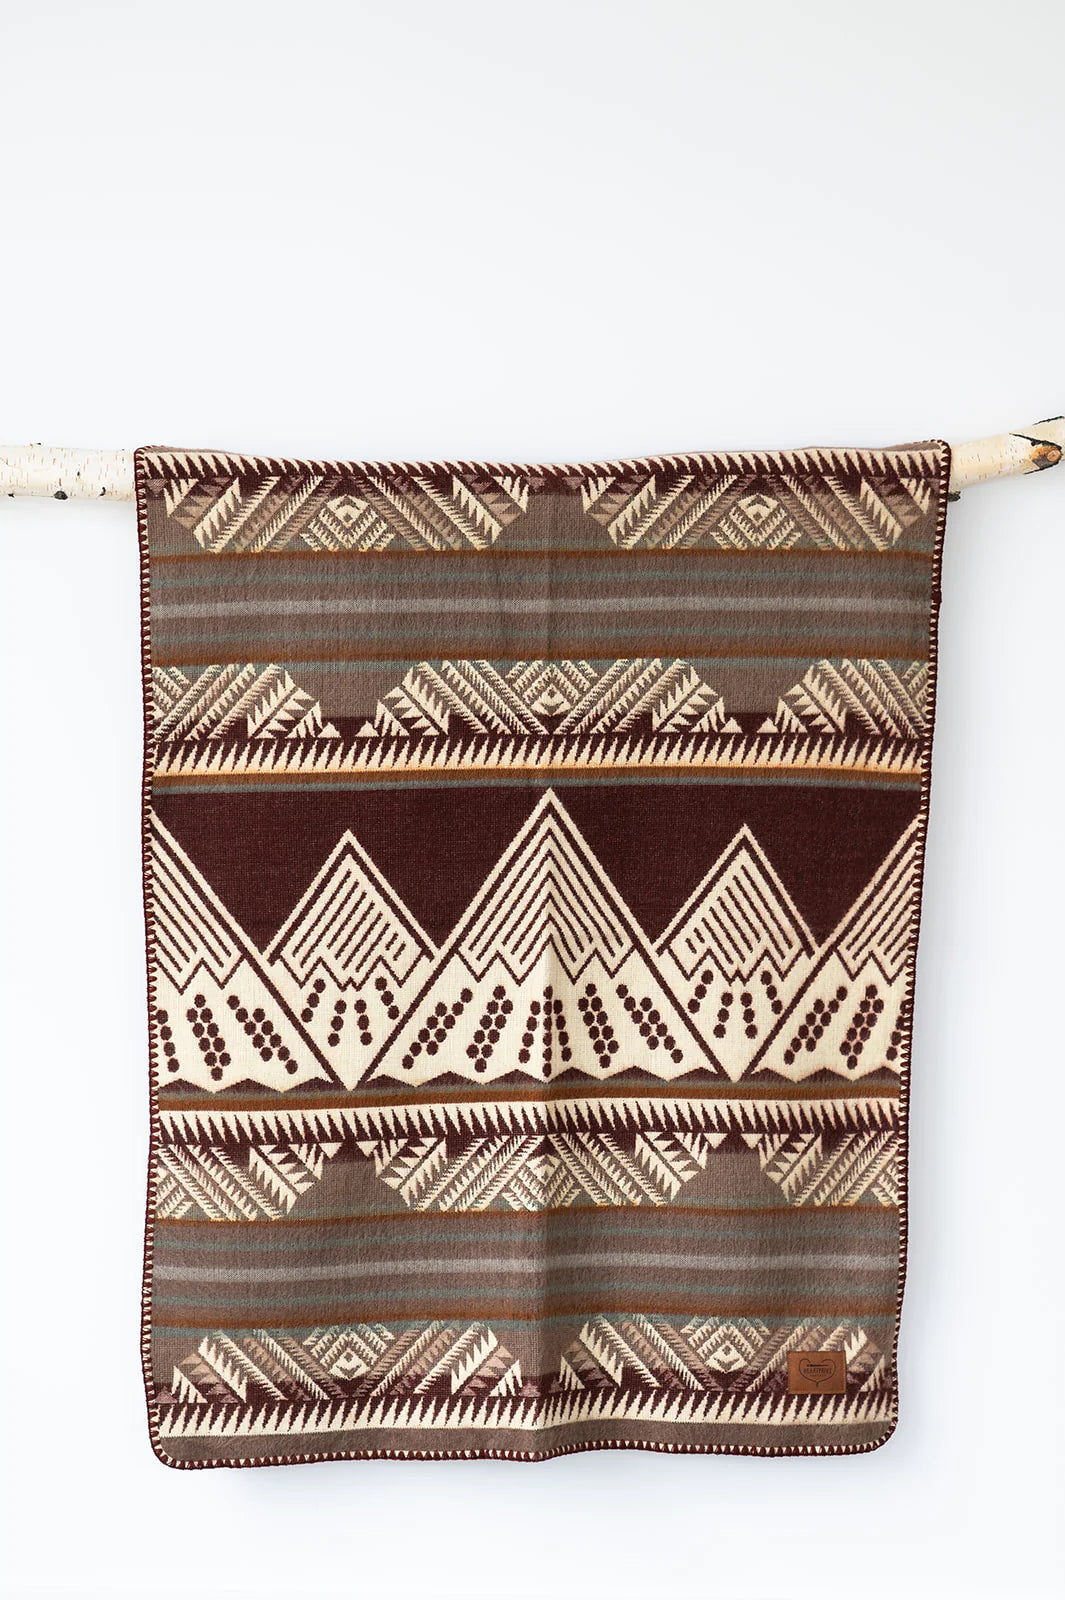 THE MOUNTAINS baby blanket